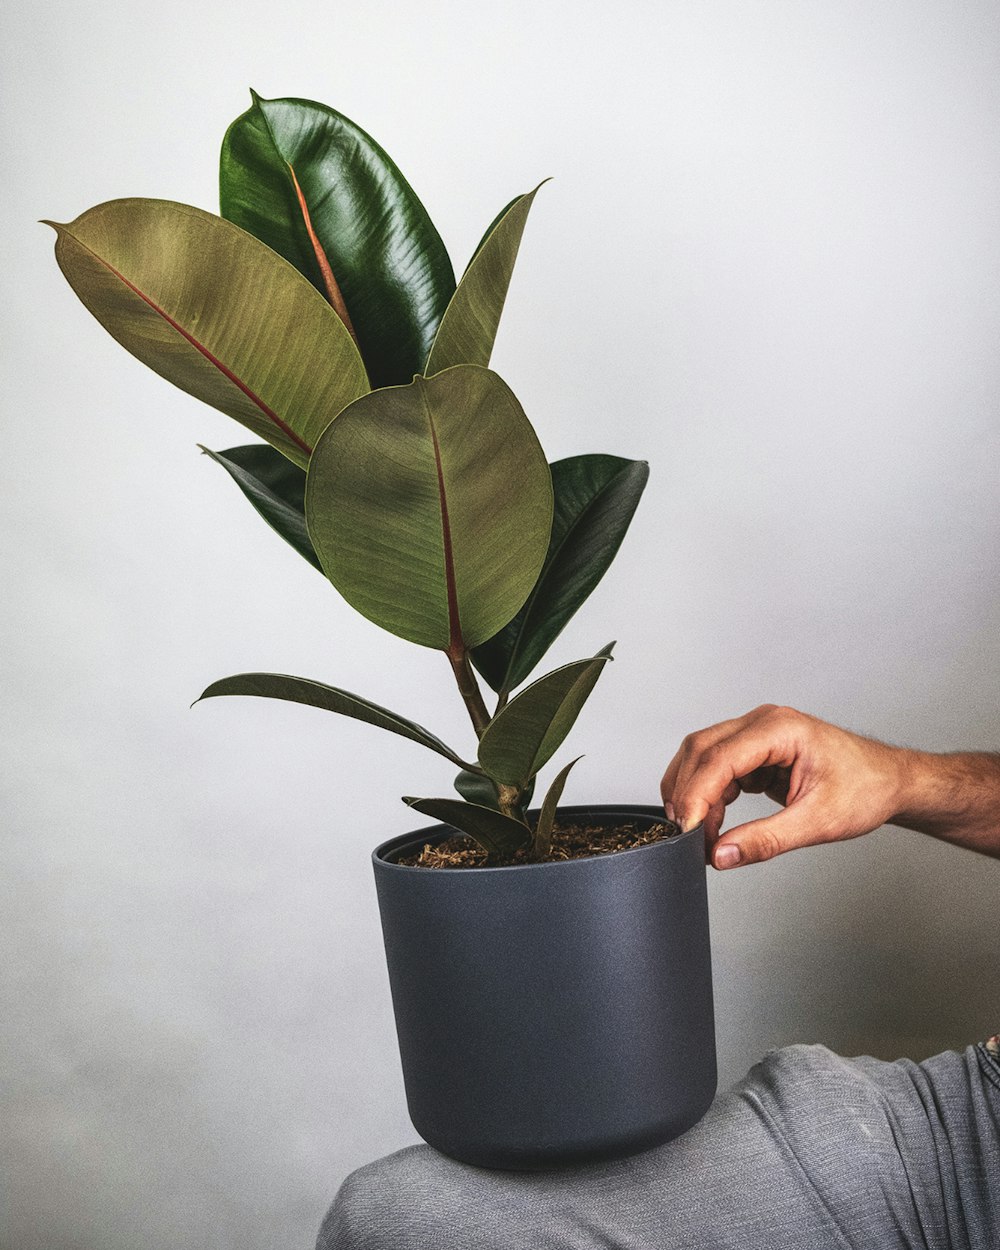 person holding green plant on black pot